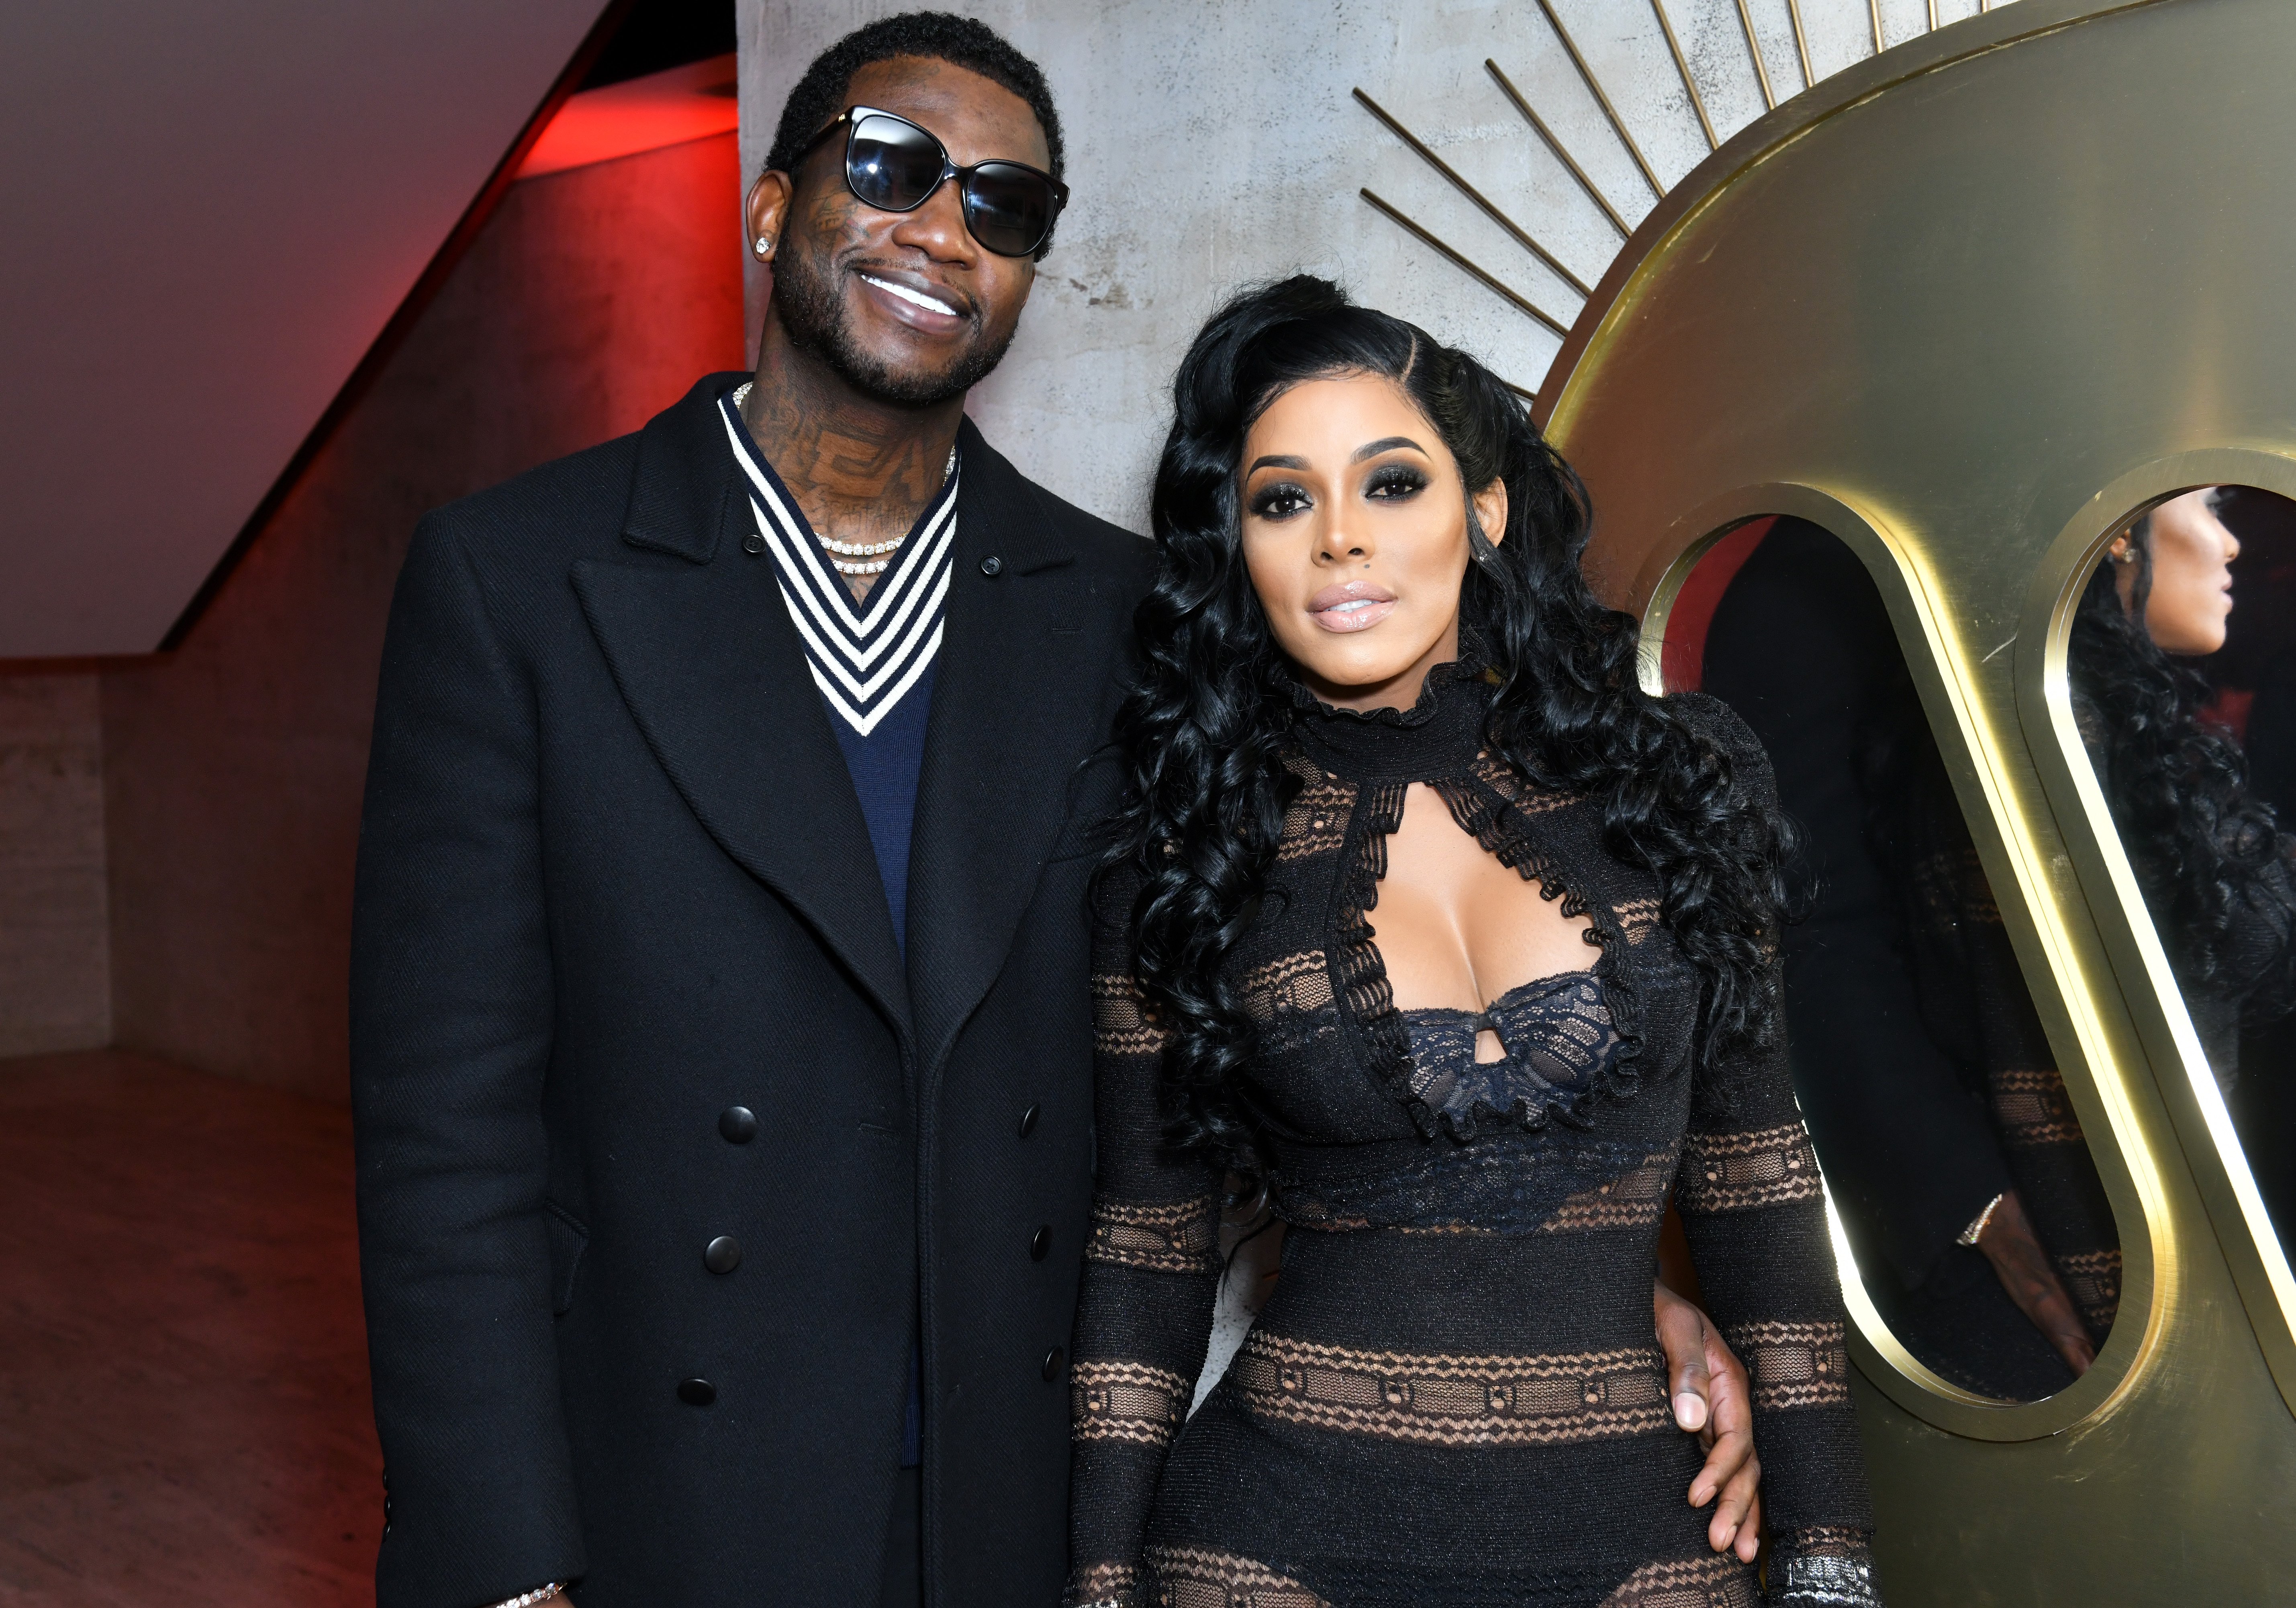 Gucci Mane and Keyshia Ka'oir at the Warner Music Group Pre-Grammy Party in January 25, 2018 in New York City. | Source: Getty Images